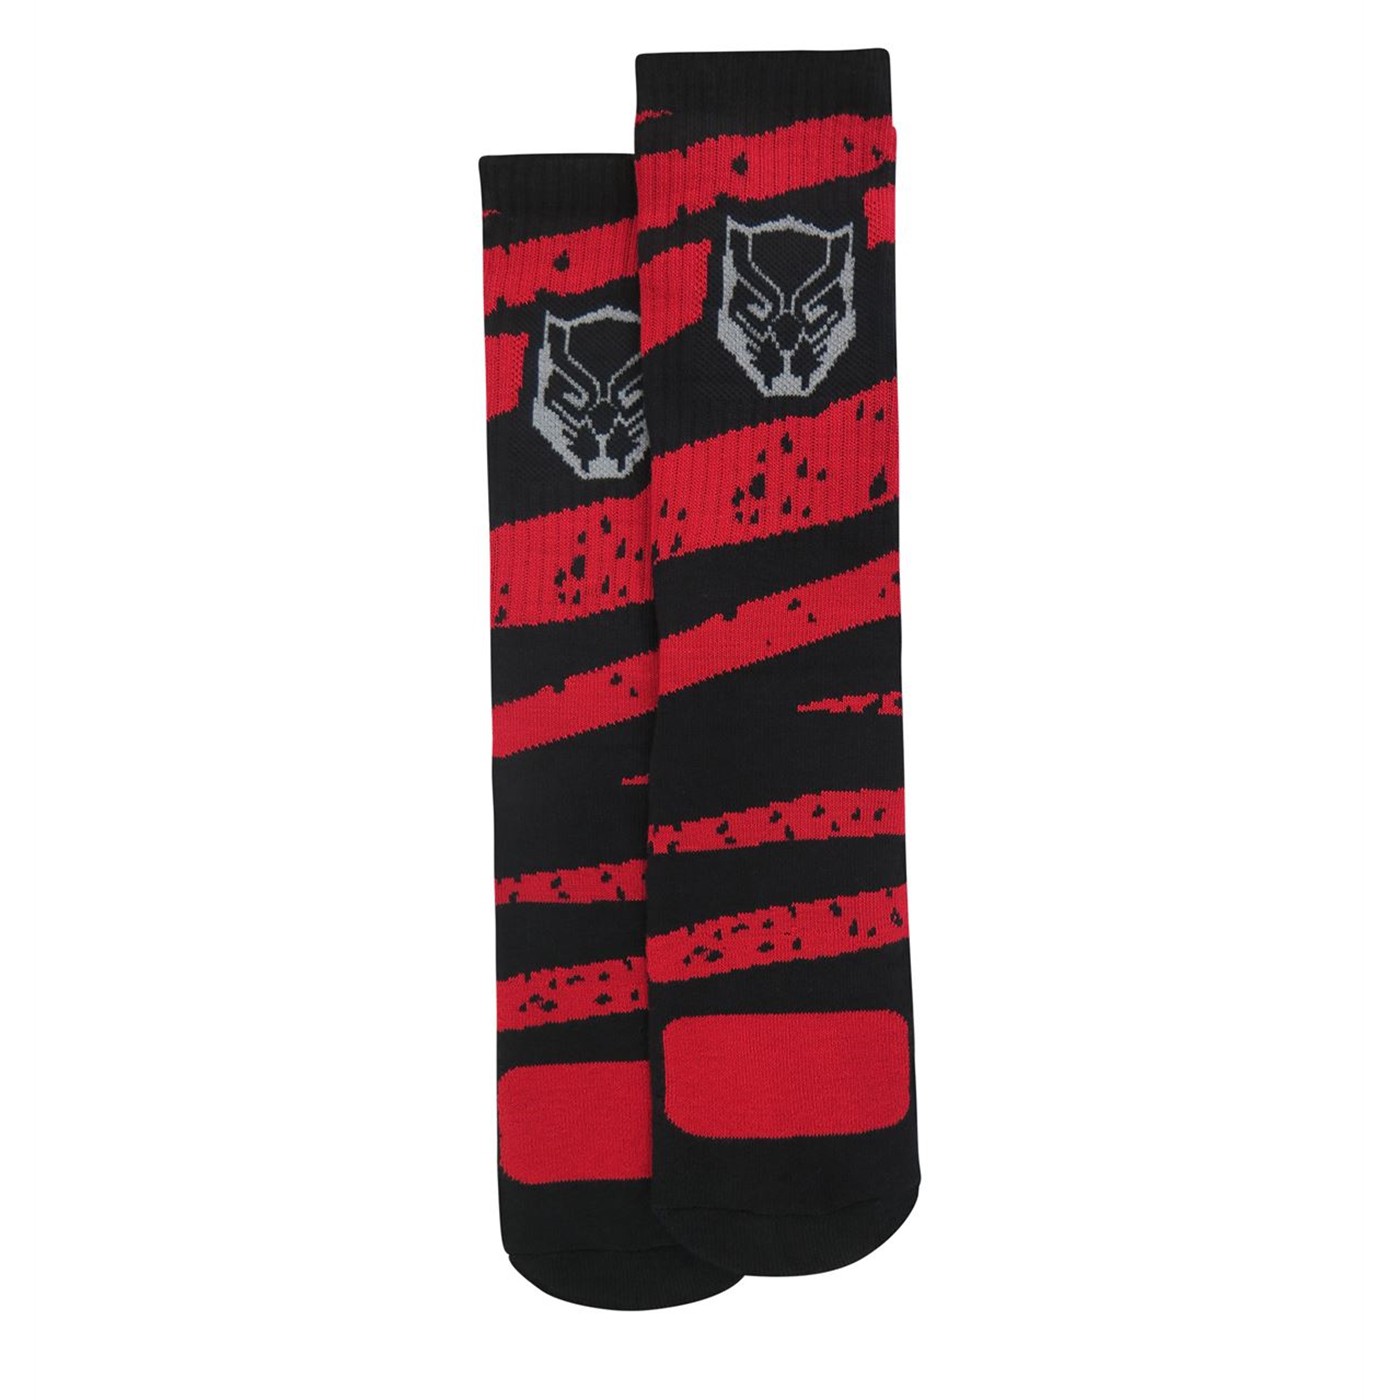 Black Panther Icon Athletic Crew Socks 2-Pack